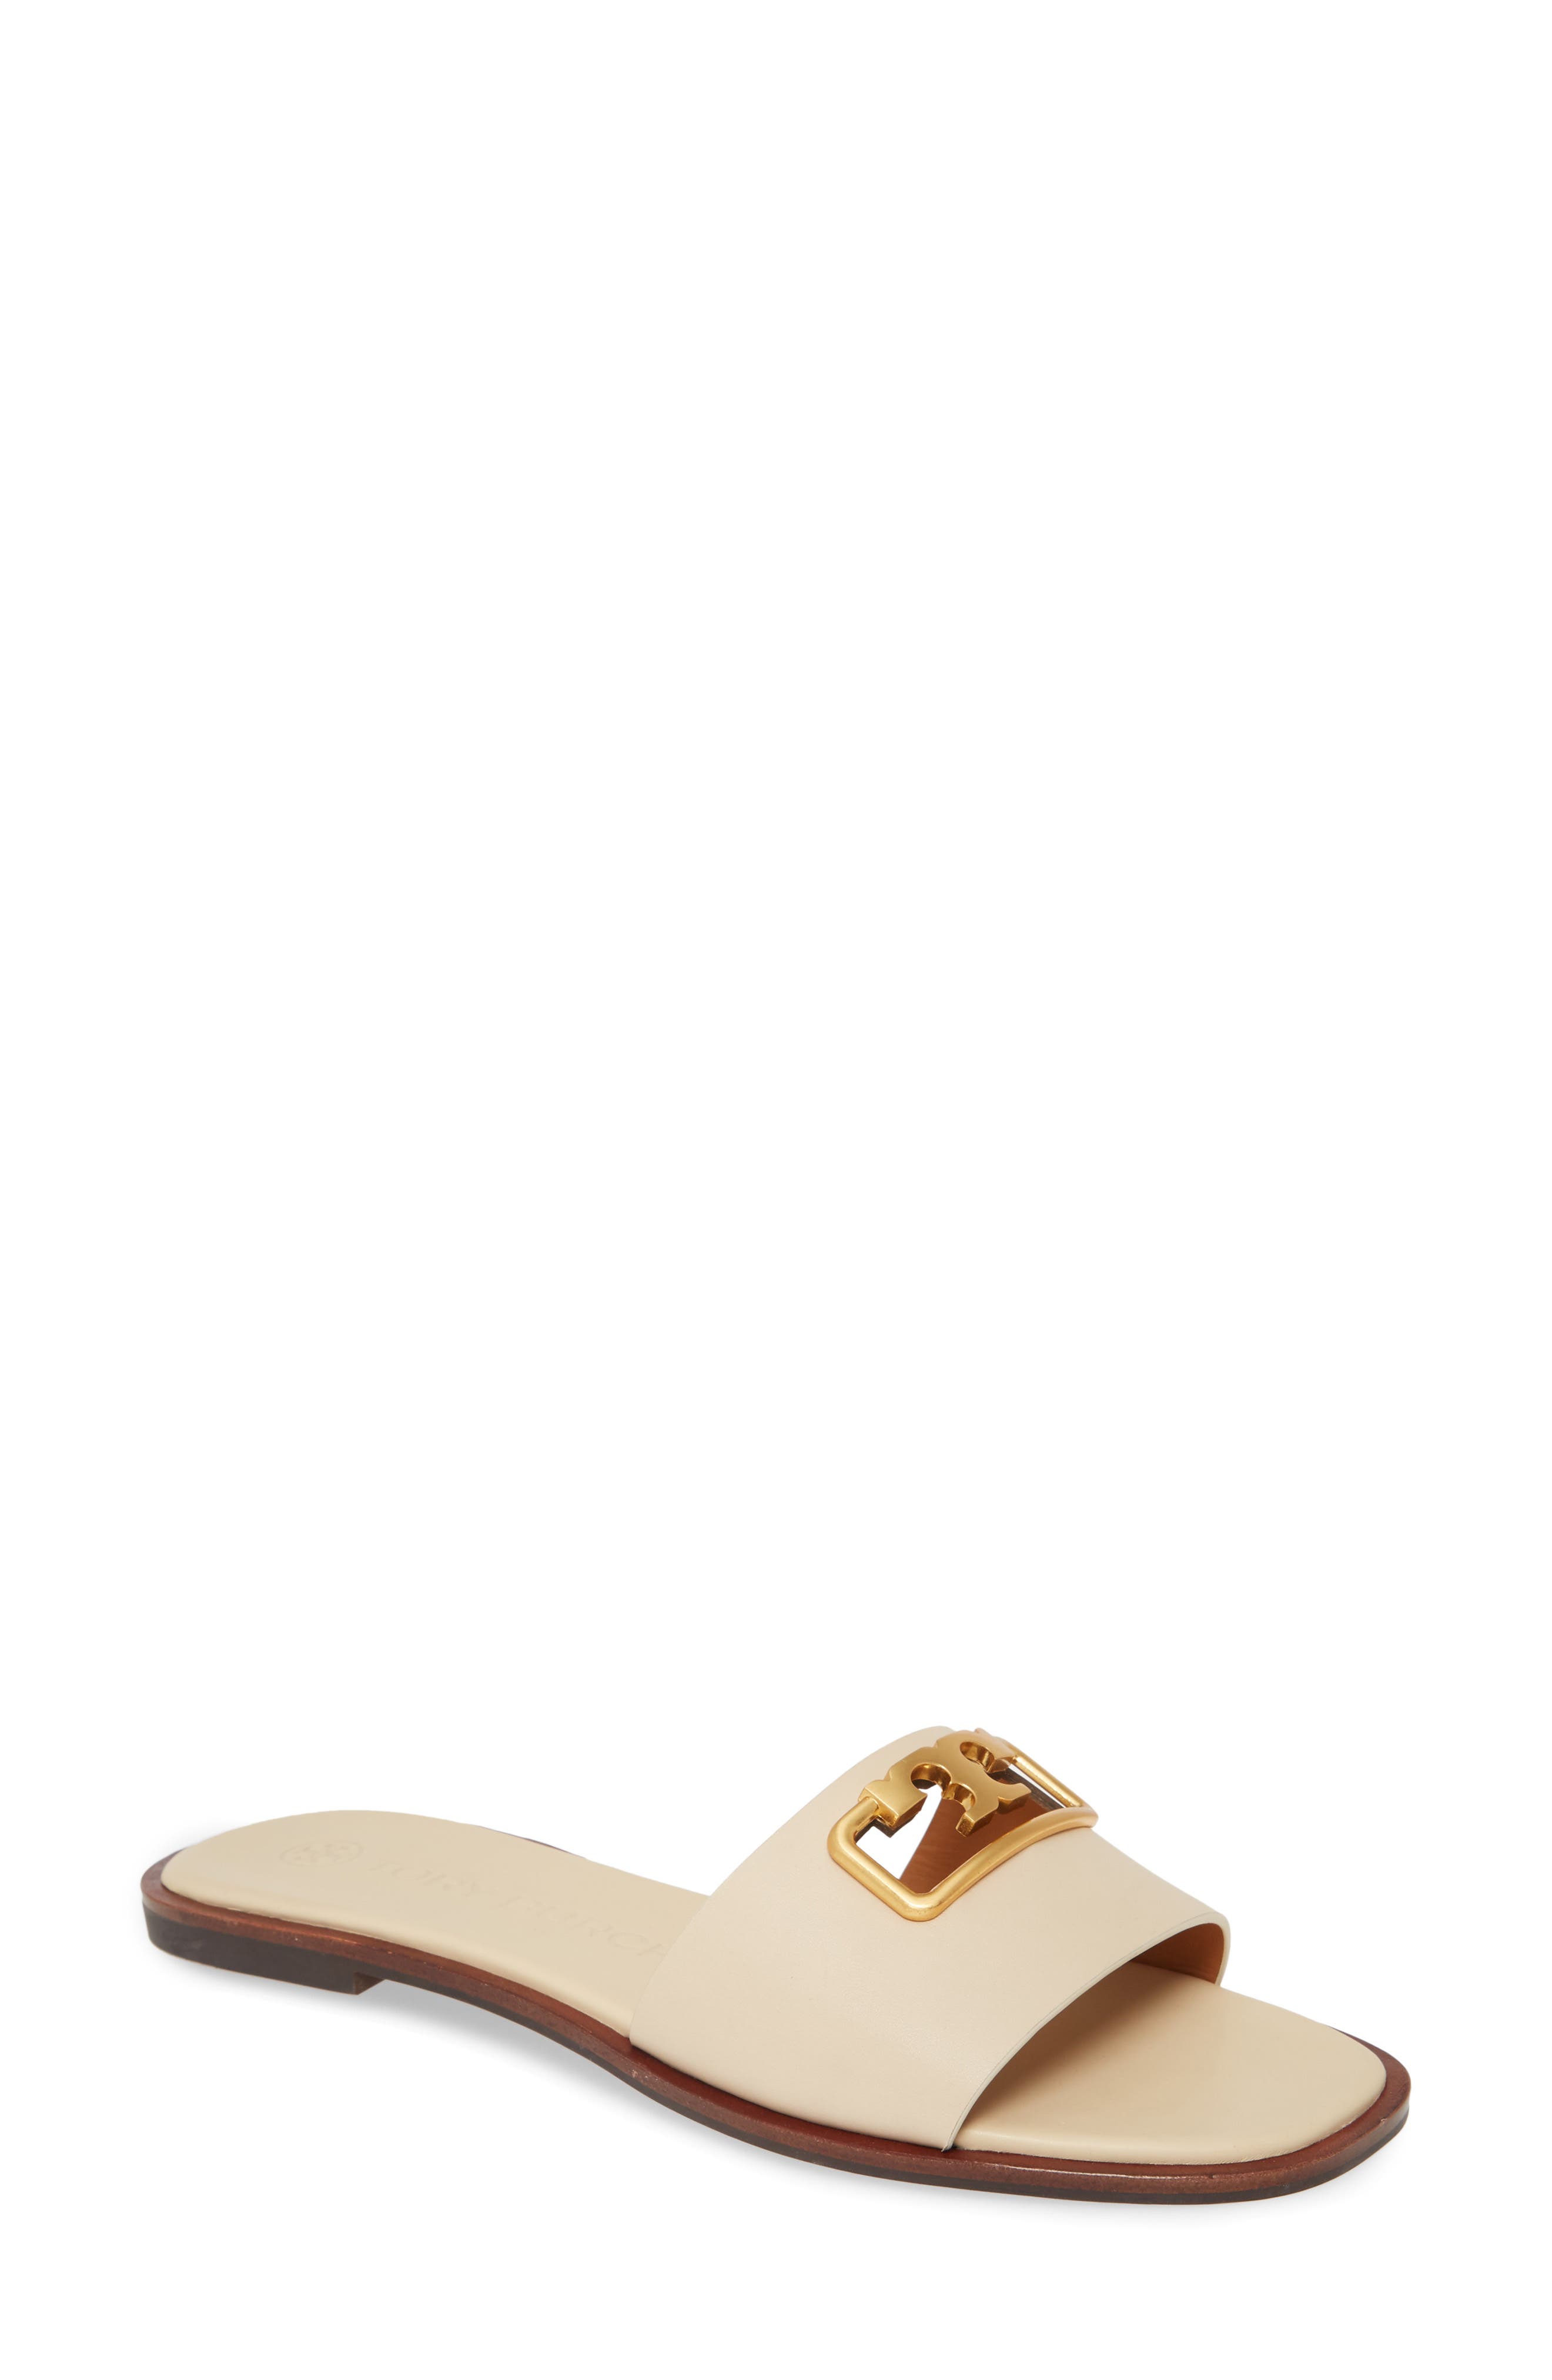 tory burch selby slide